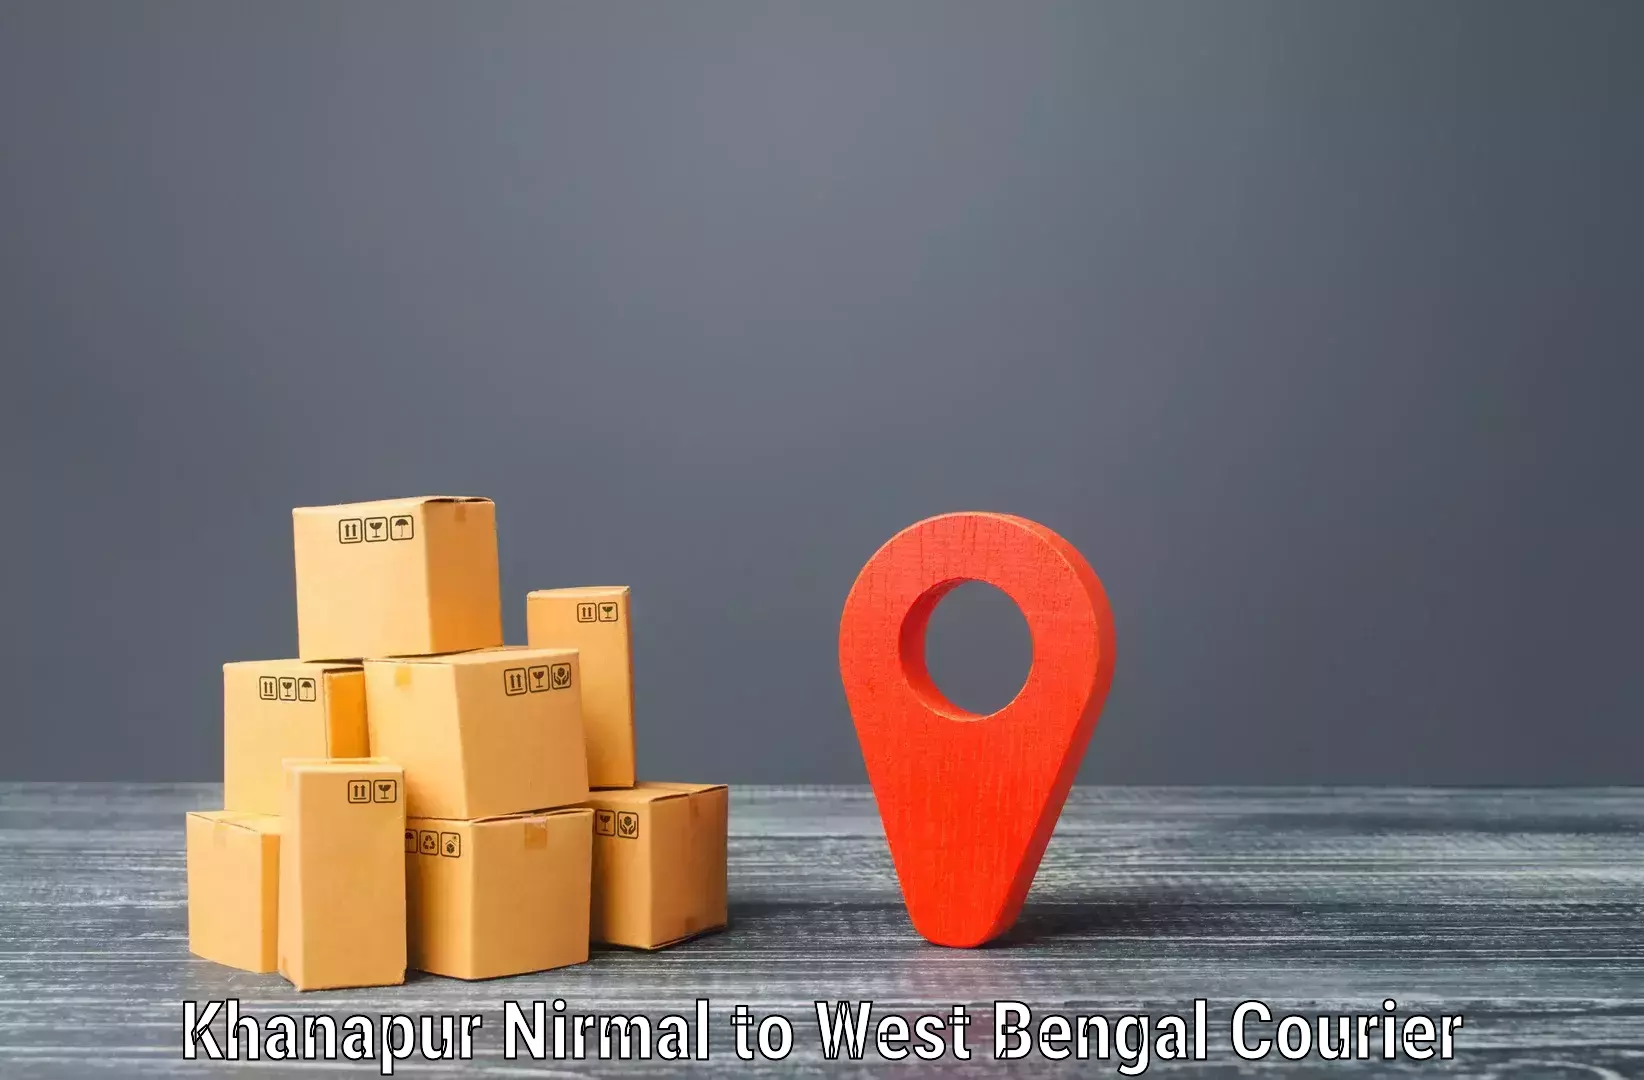 Doorstep delivery service in Khanapur Nirmal to Nabadwip